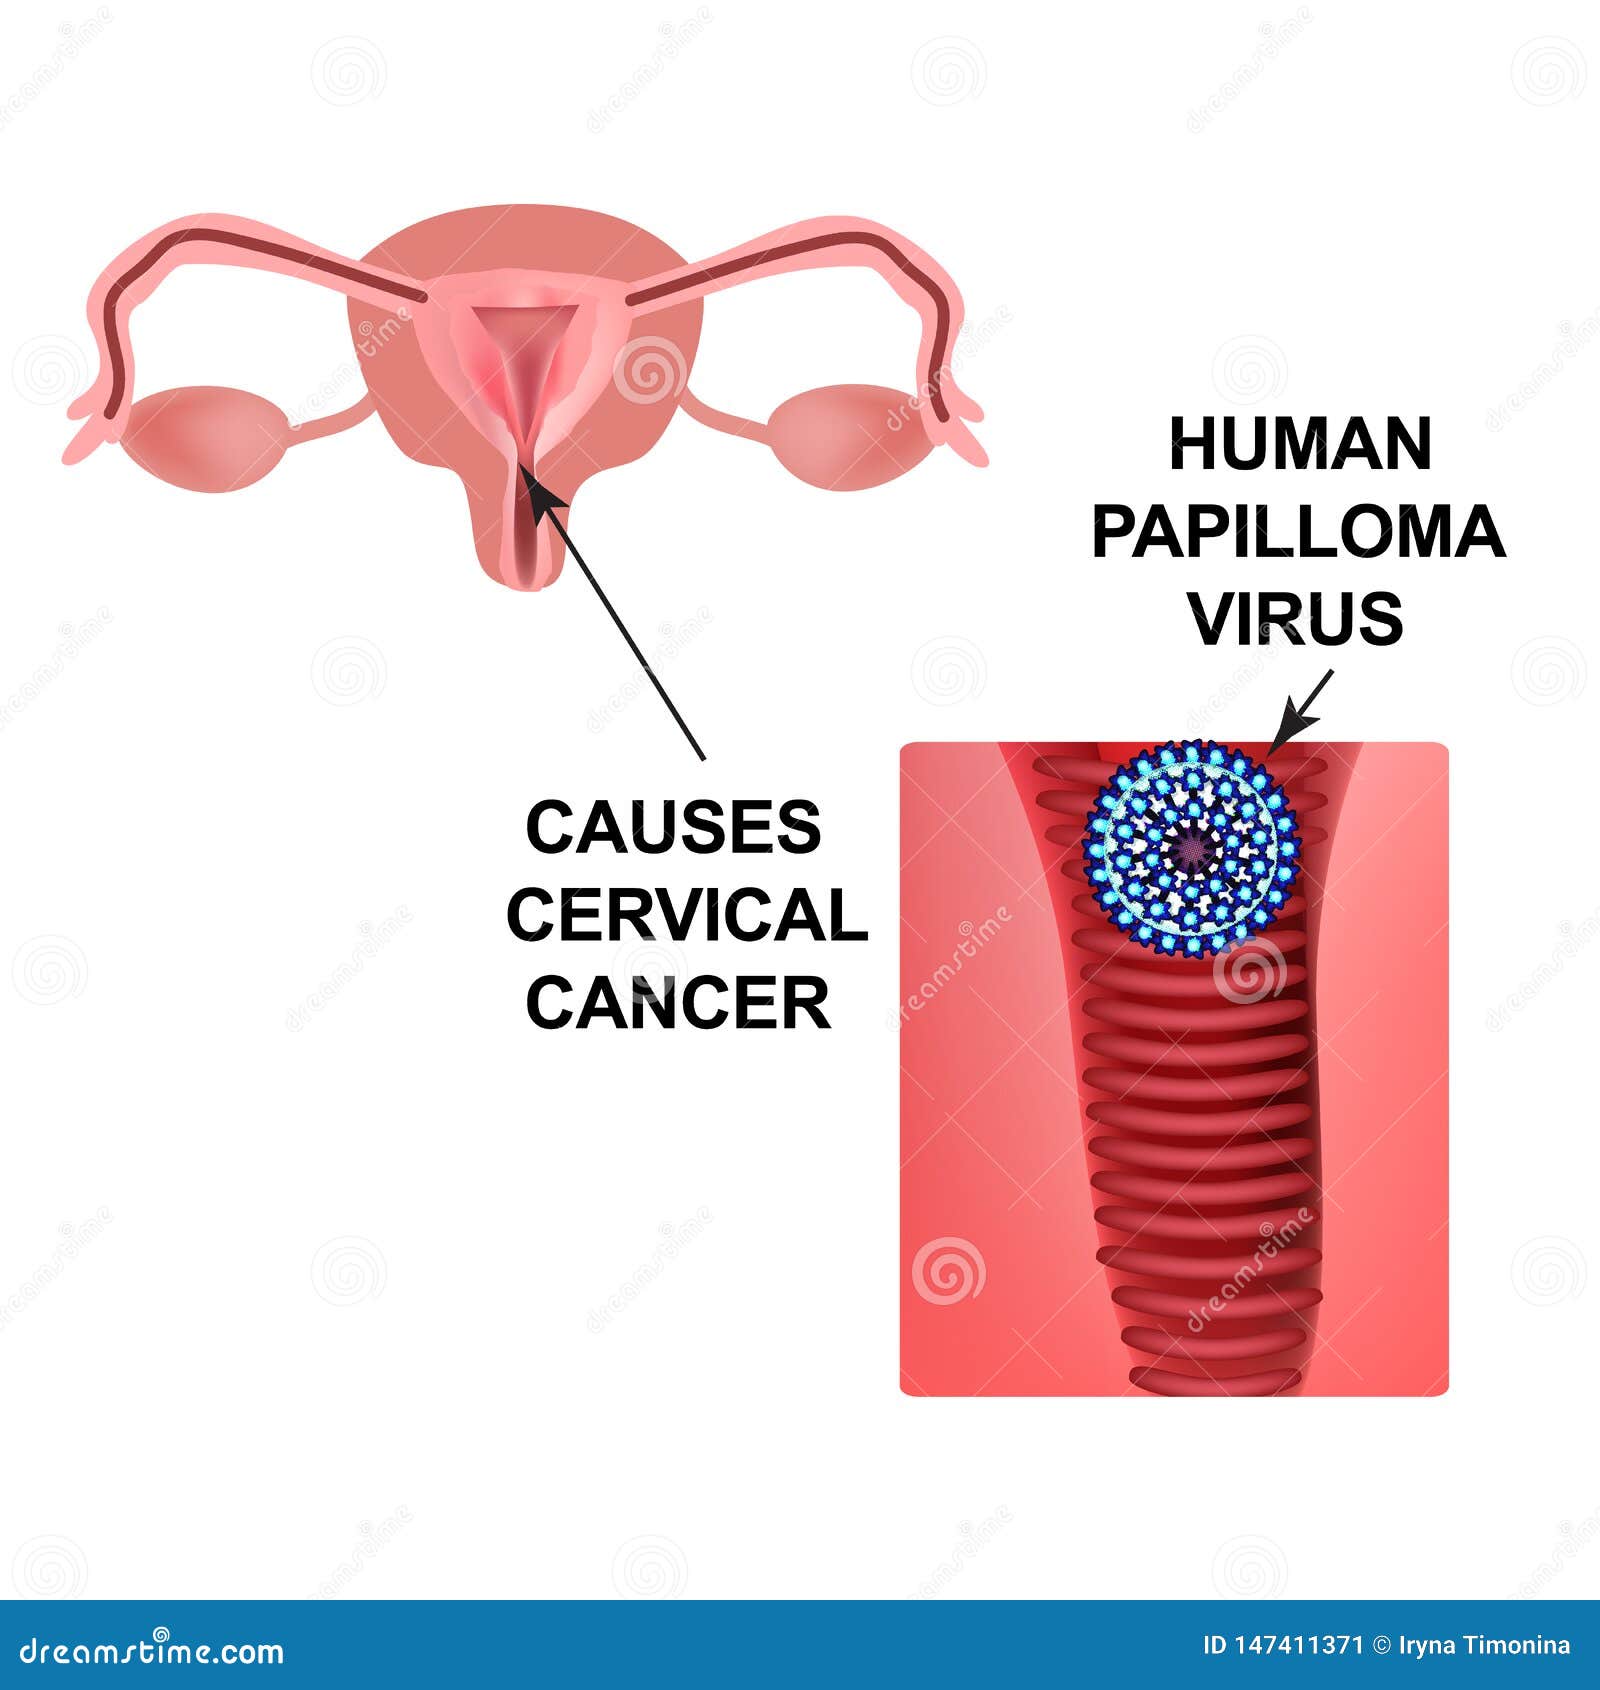 Hpv virus that causes cancer Can having hpv cause cancer Preventing HPV papilloma virus what is it